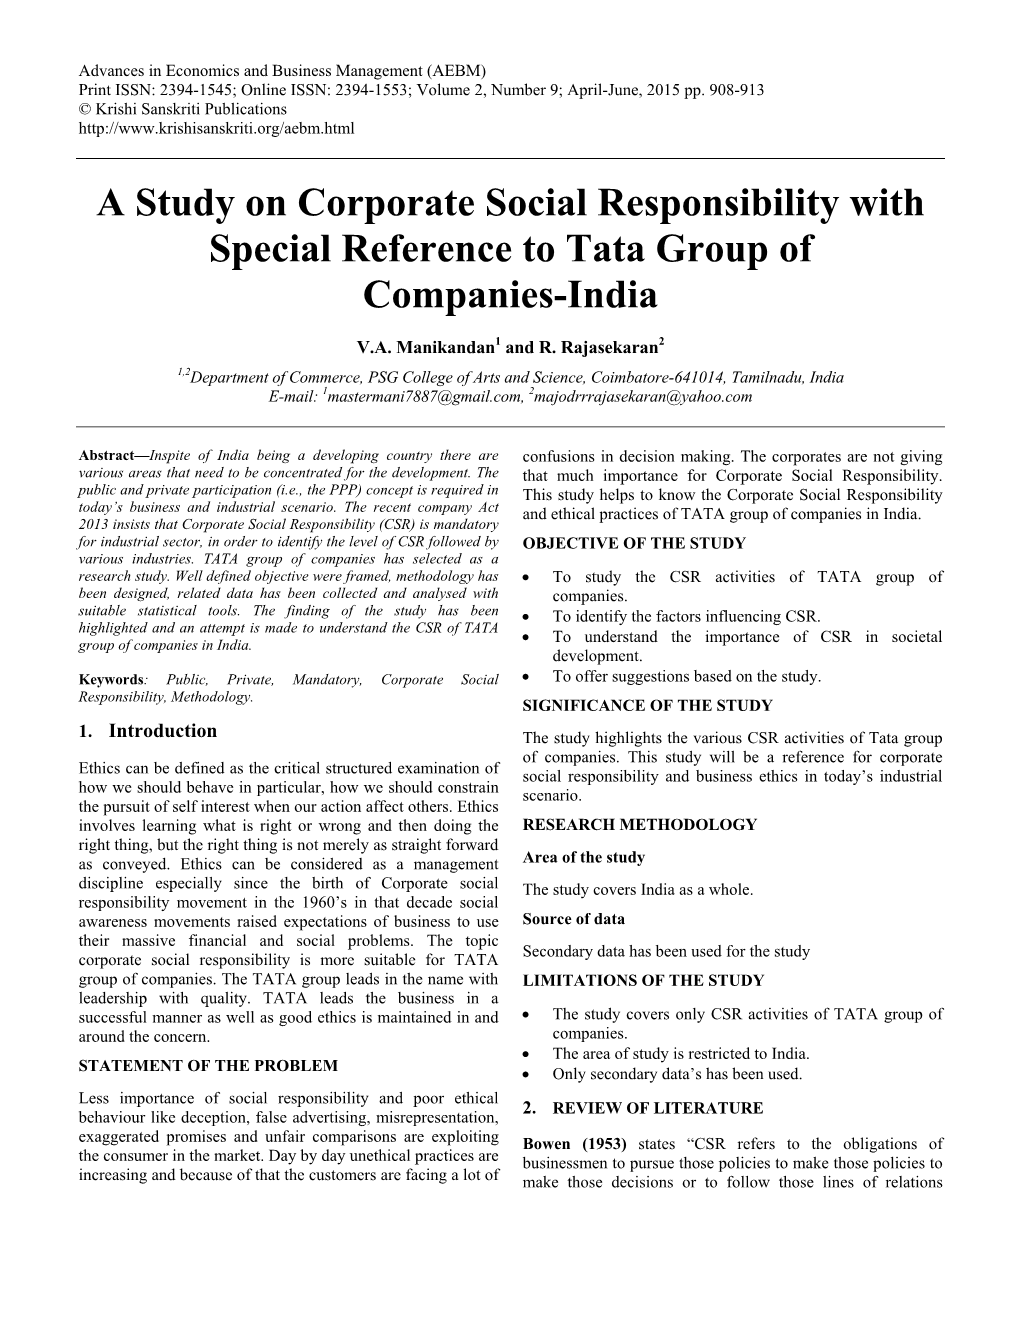 A Study on Corporate Social Responsibility with Special Reference to Tata Group of Companies-India